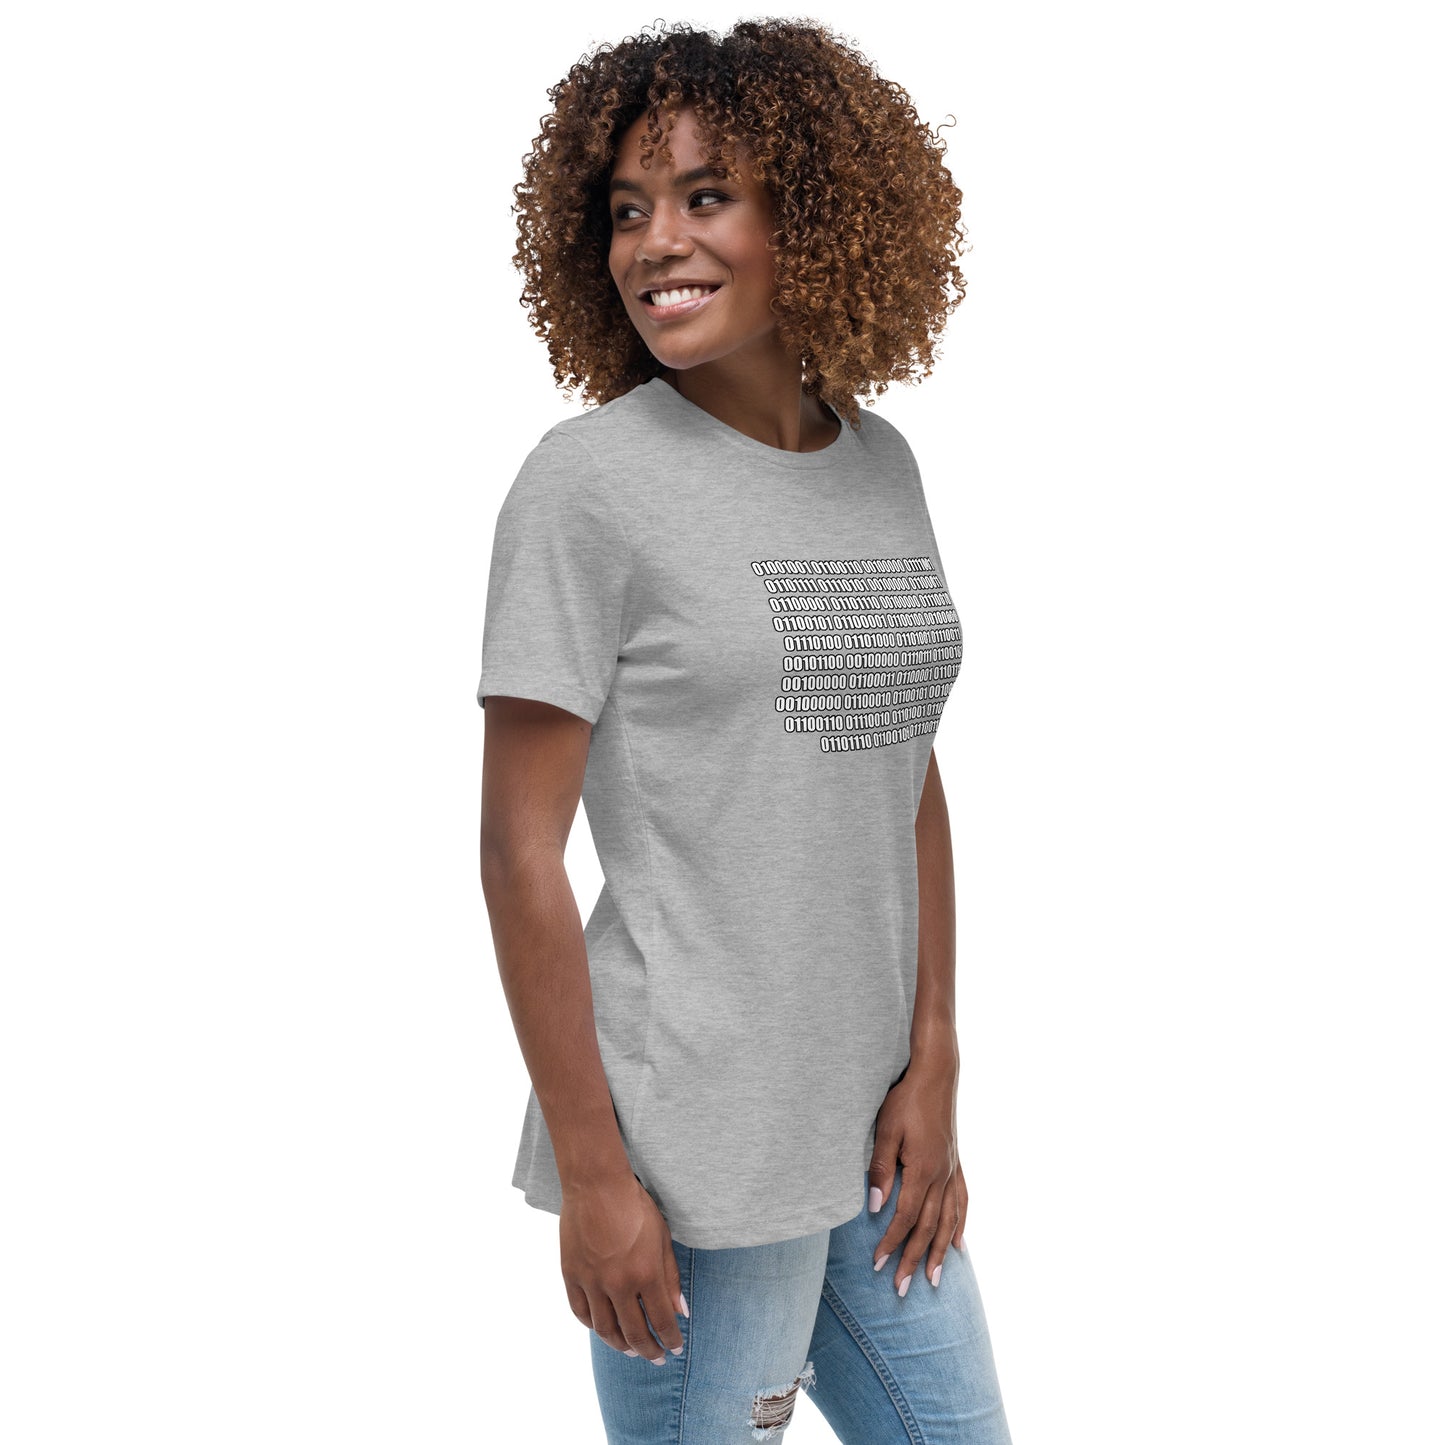 Woman with grey t-shirt with binary code "If you can read this"